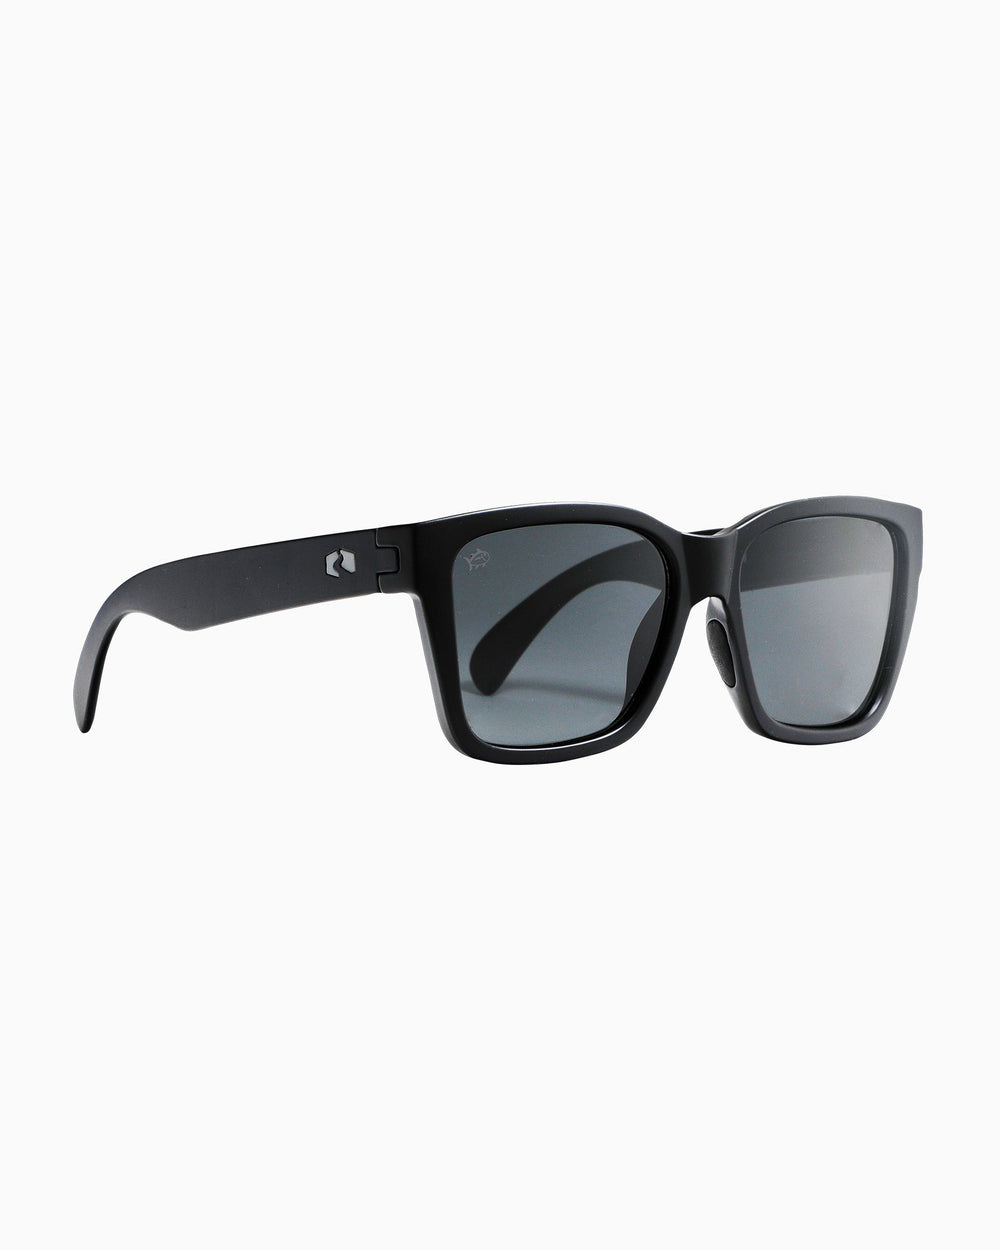 The side of the Rheos Edistos Sunglasses by Southern Tide - Gunmetal